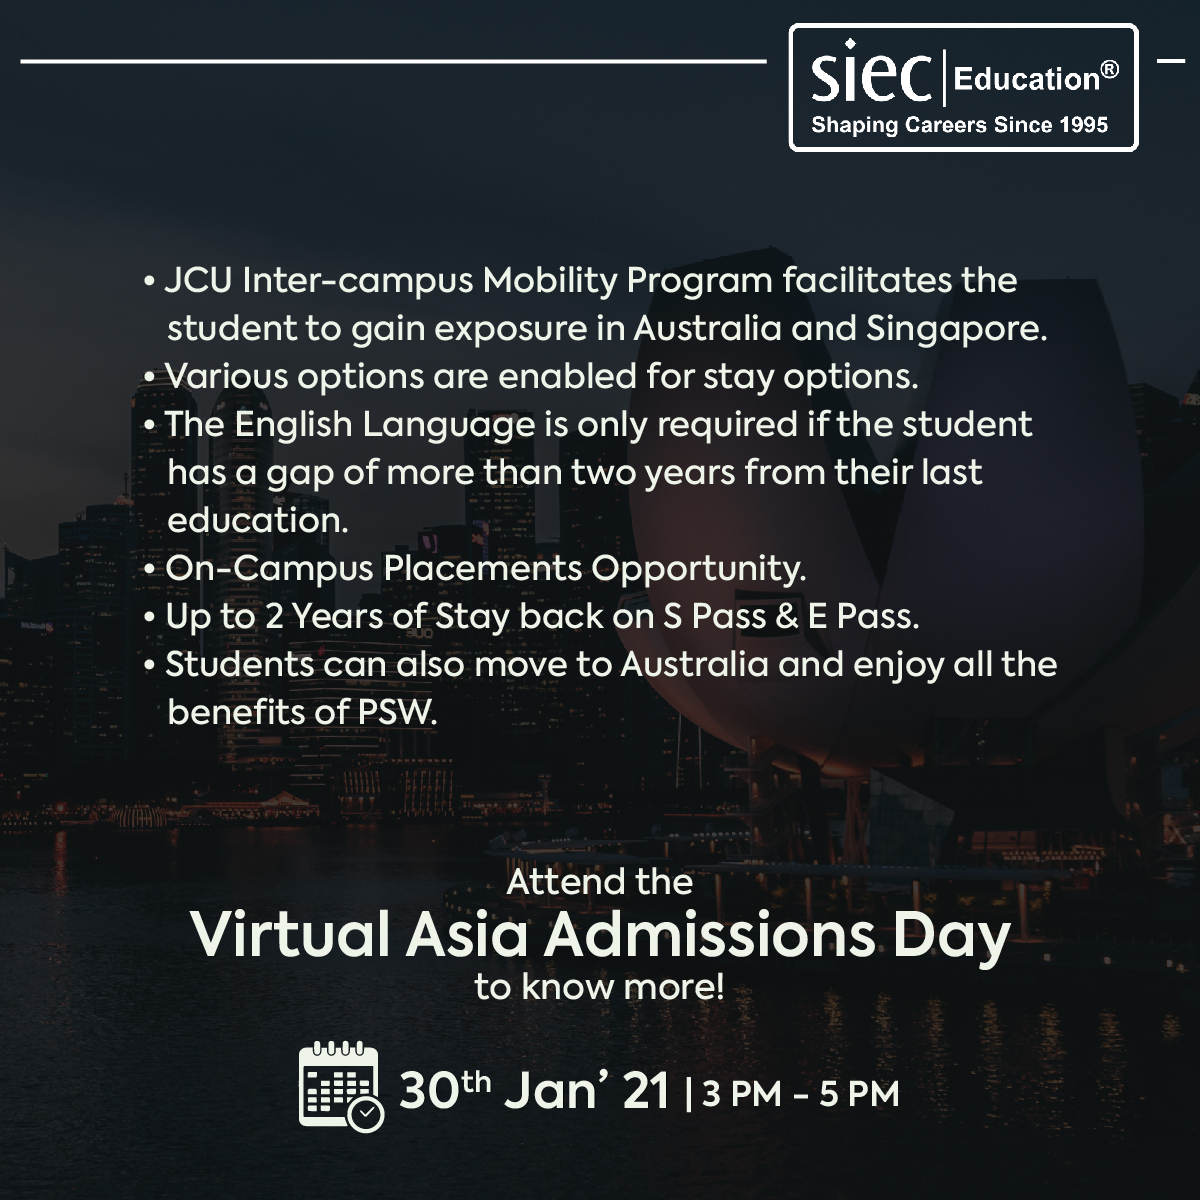 Top reasons to choose James Cook University, Singapore!

Attend SIEC's Virtual Asia Admissions Day to know more.

Register now: bit.ly/39ywhrL
Call/WhatsApp: 9779046382

#studyinsingapore #jamescookuniversity #jamescookuniversitysingapore #singapore